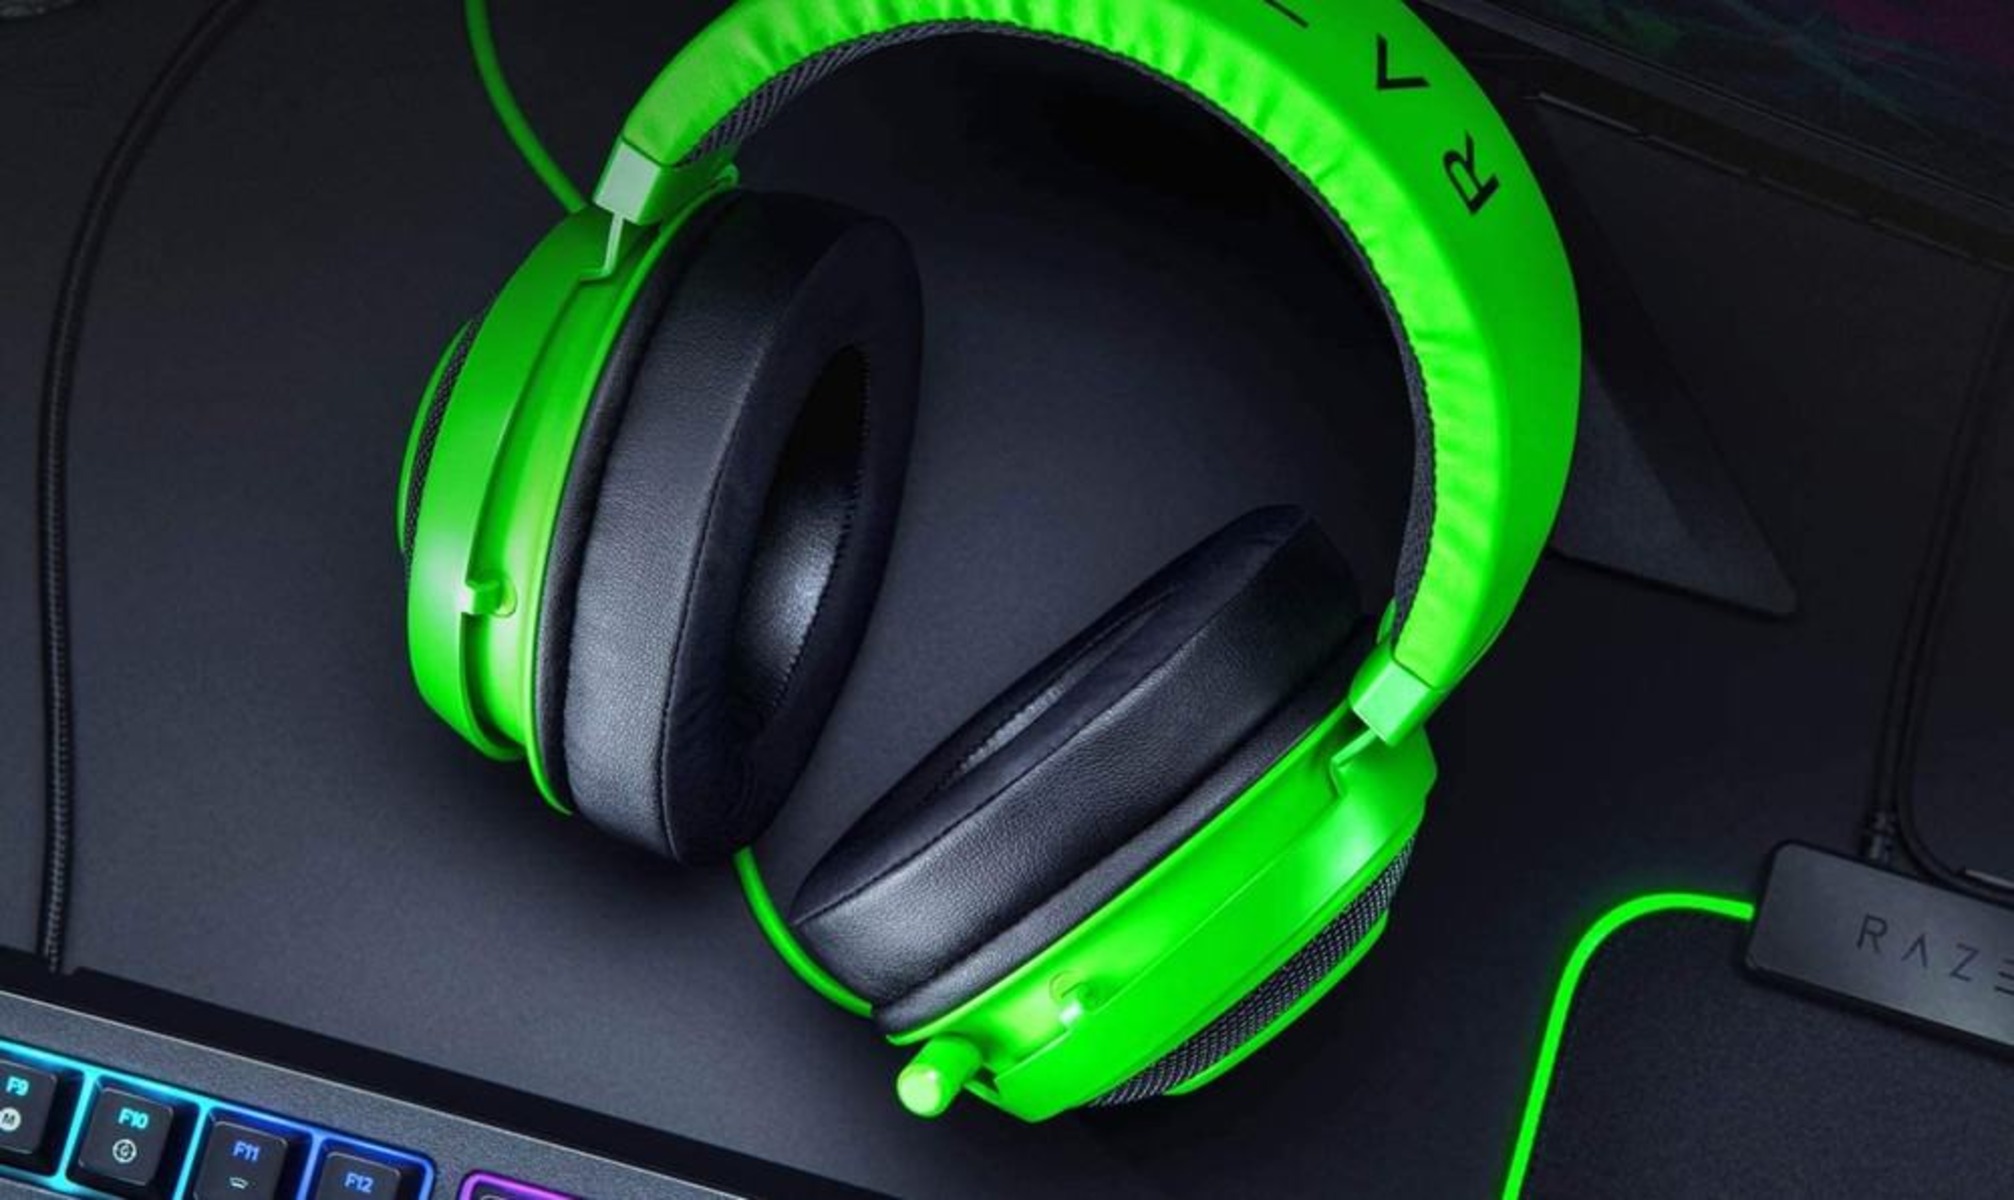 How To Make Logitech Gaming Headset More Comfortable